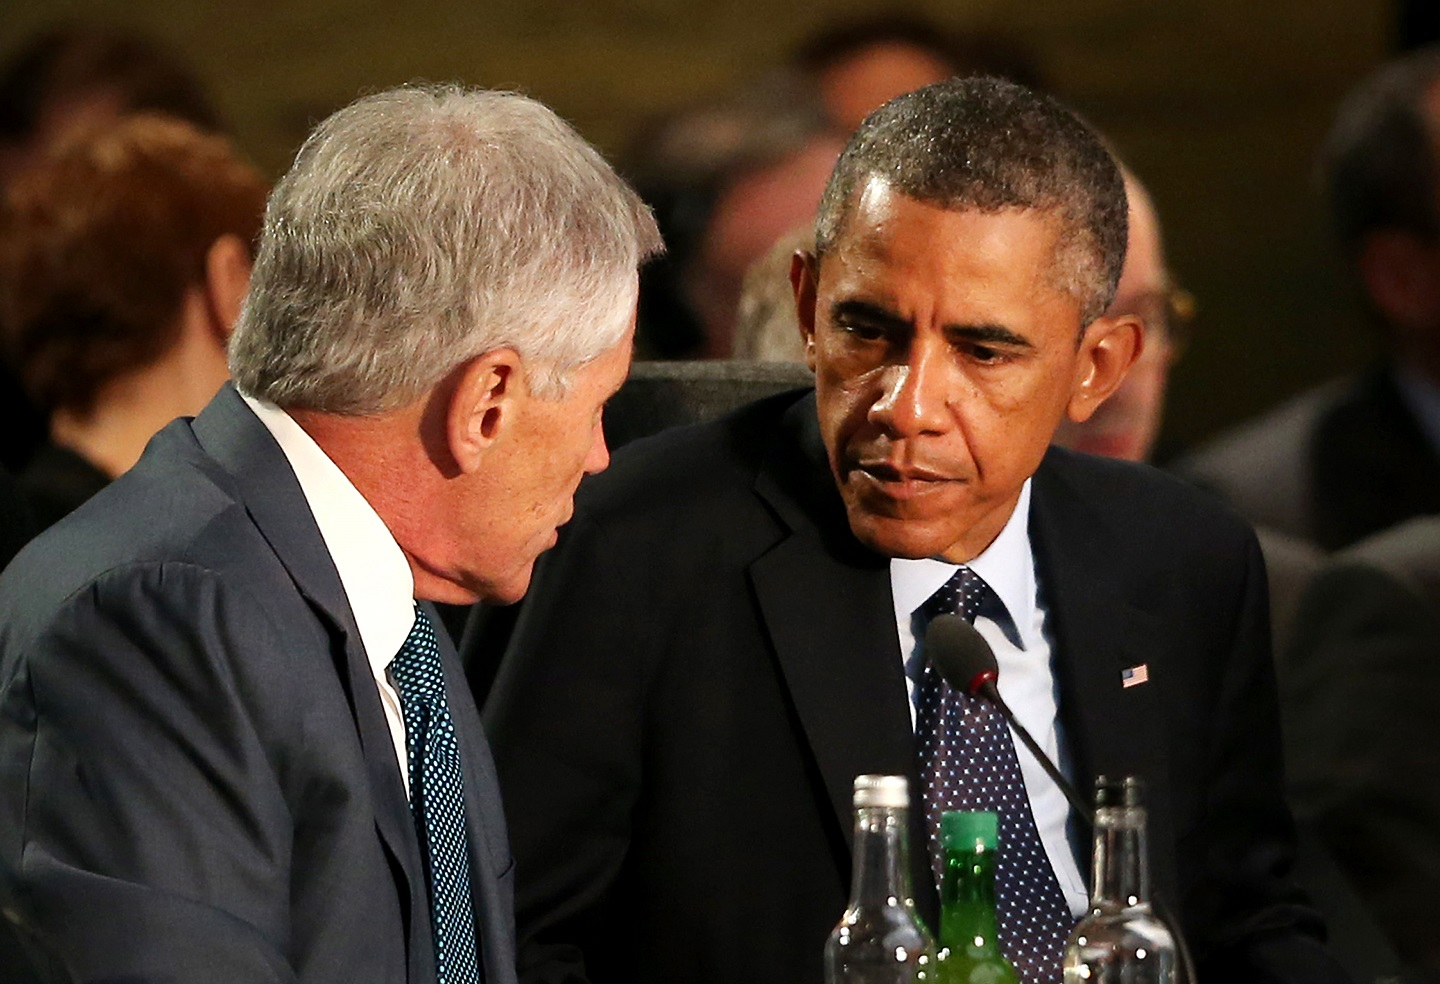 President Barack Obama (R) listens to Defence Secretary Chuck Hagel at the NATO Summit on September 5, 2014 in Newport, Wales. Leaders and senior ministers from around 60 countries are meeting on the final day of the two day summit, with Afghanistan and Ukraine at the top of the agenda.